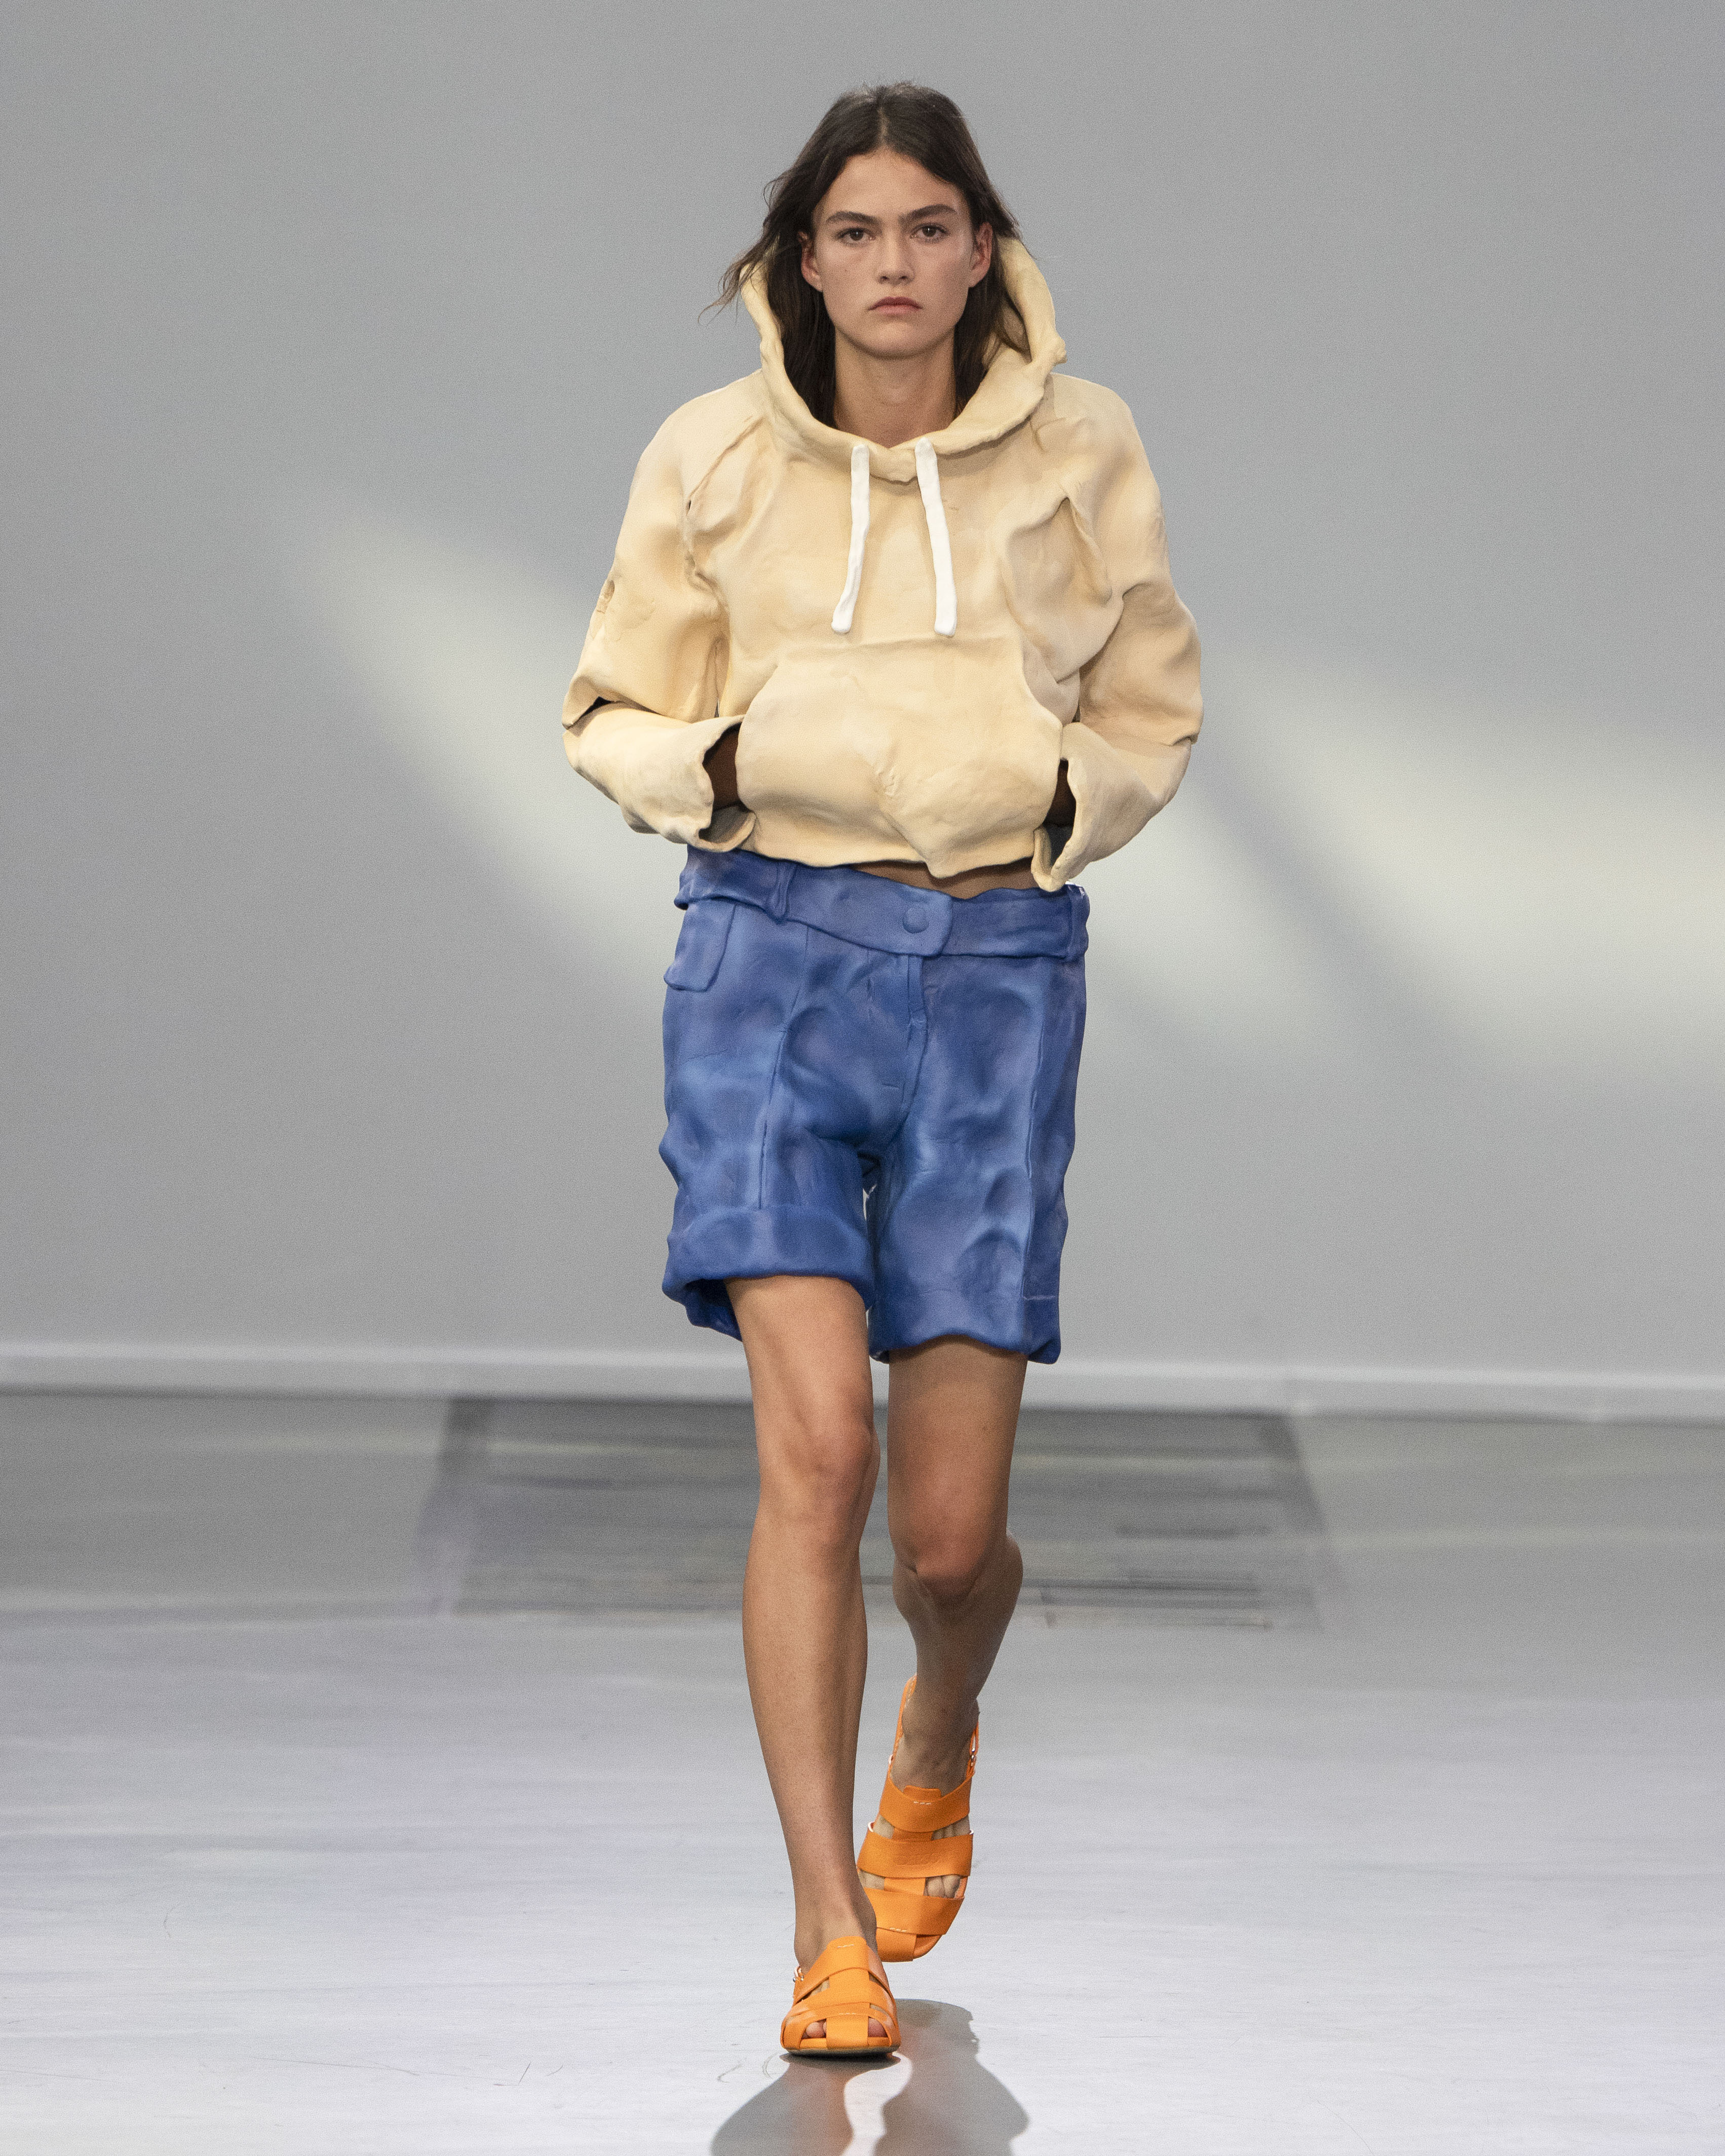 JW Anderson SS24 was about bringing playfulness to the plain